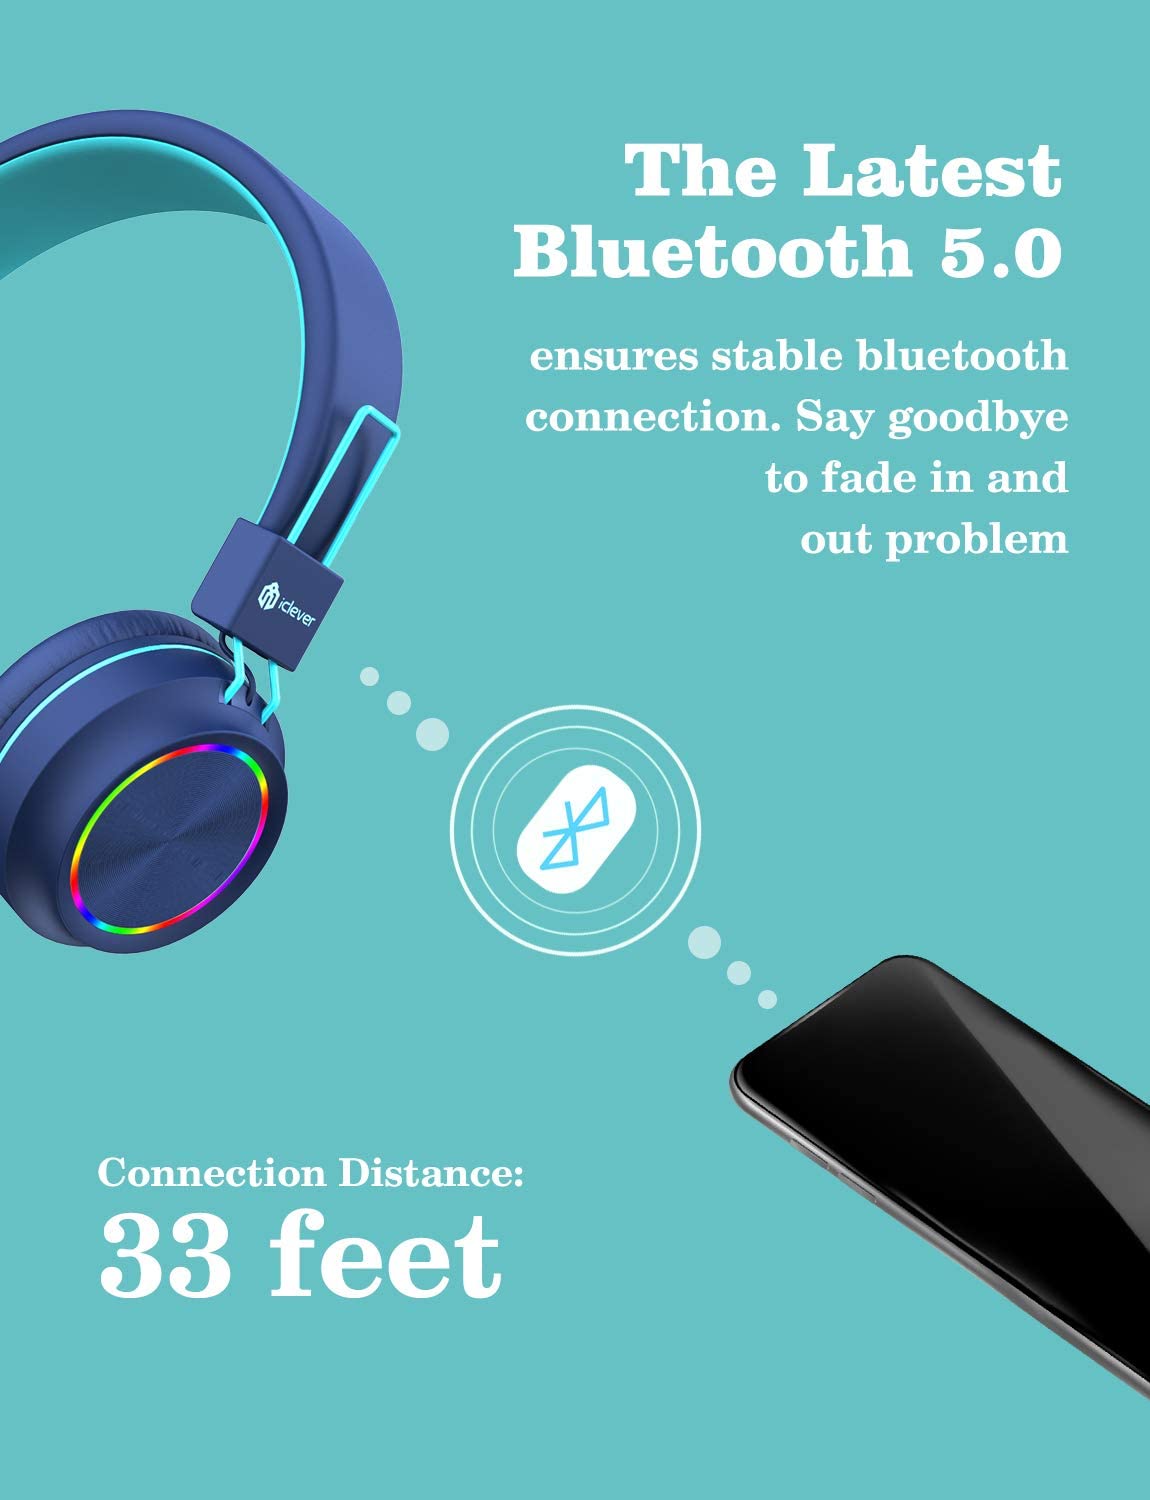 iClever BTH03 Kids Headphones, Colorful LED Lights Kids Wireless Headphones with MIC, 25H Playtime, Stereo Sound, Bluetooth 5.0, Foldable, Childrens Headphones on Ear for Study Tablet Airplane, Blue.